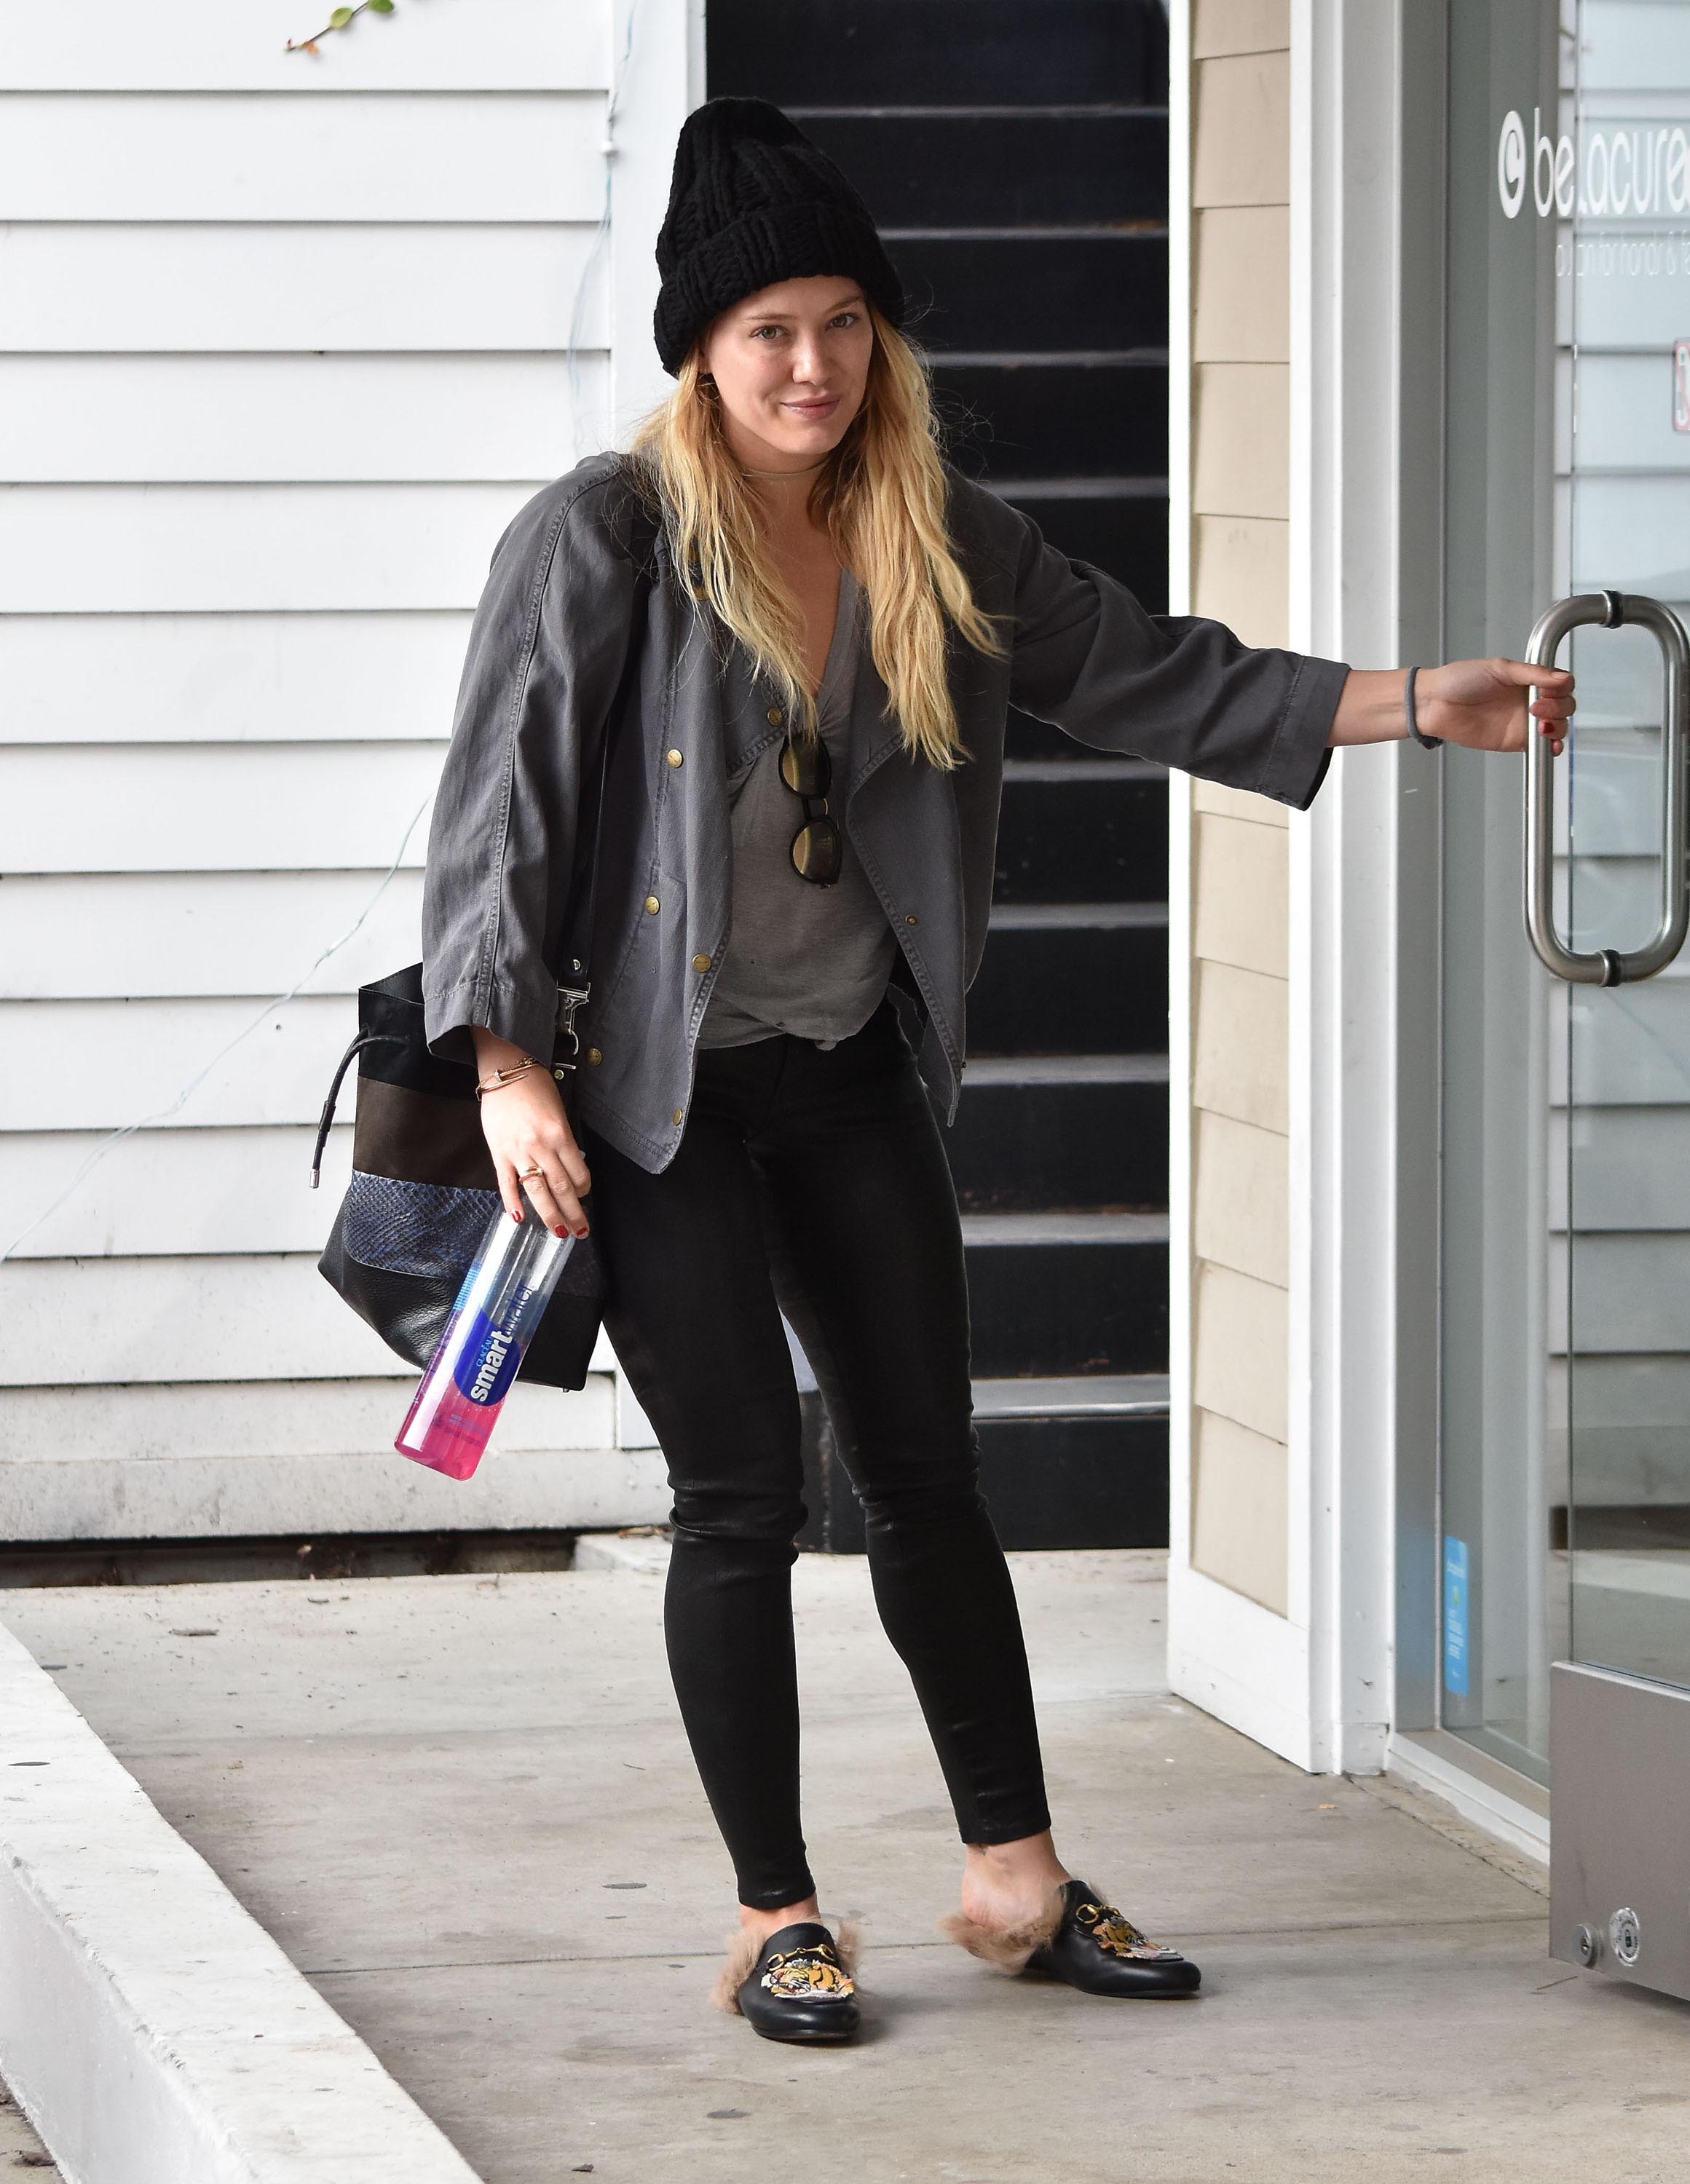 Hilary Duff spotted out and about in Studio City